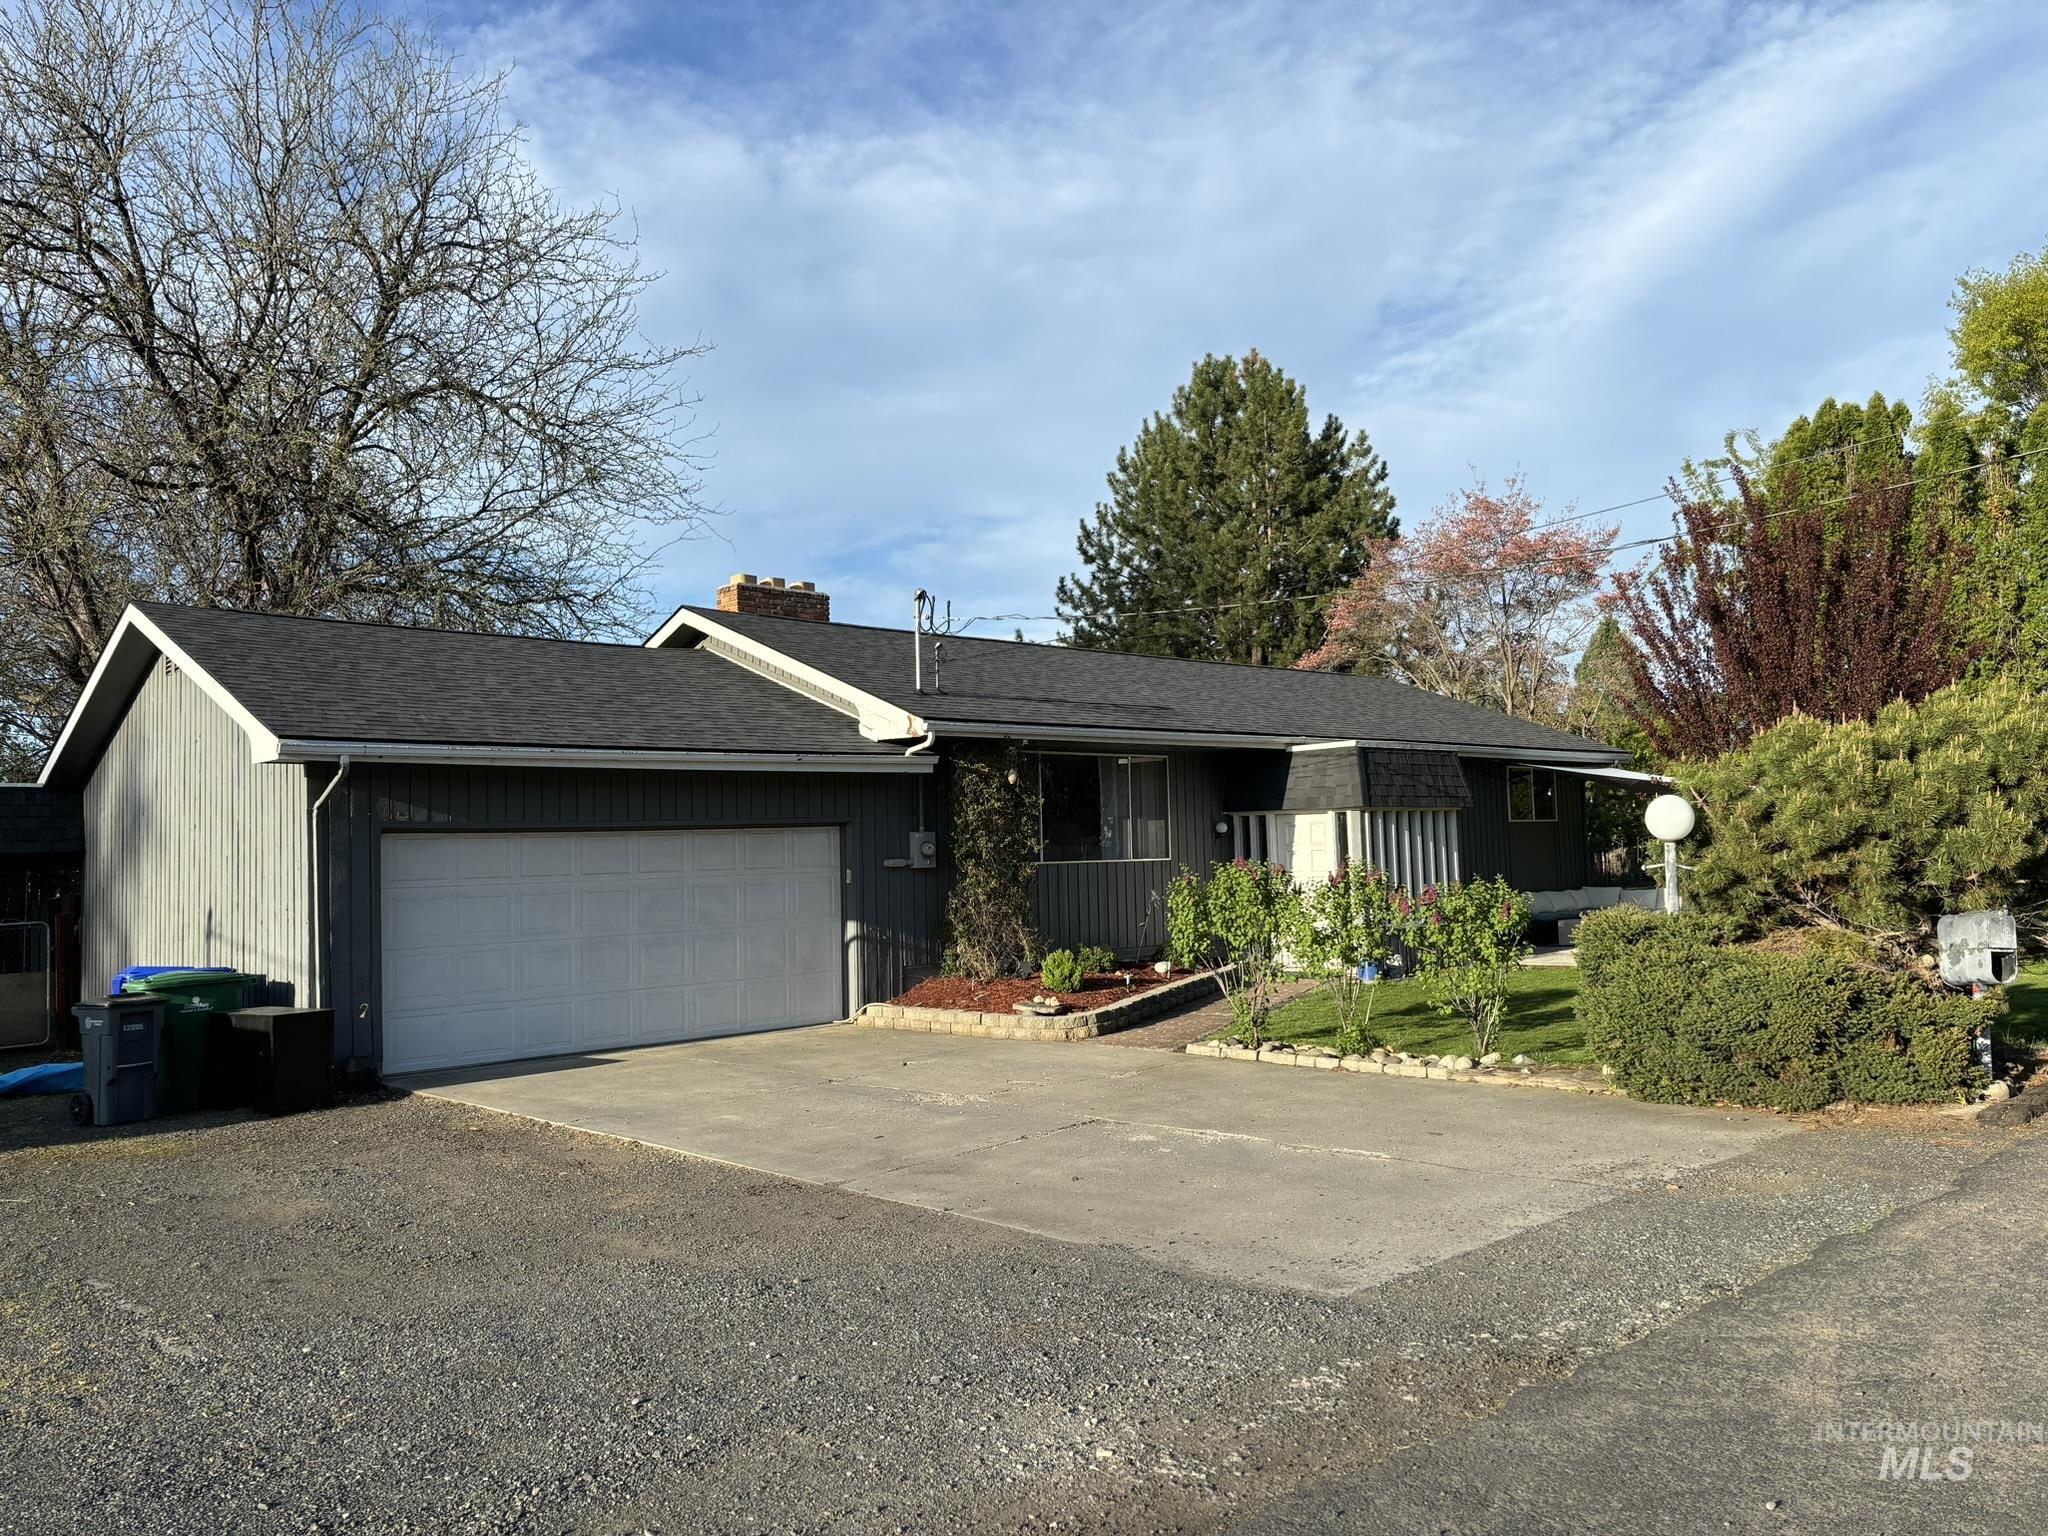 423 Park Dr., Lewiston, Idaho 83501, 4 Bedrooms, 2.5 Bathrooms, Residential For Sale, Price $410,000,MLS 98906755